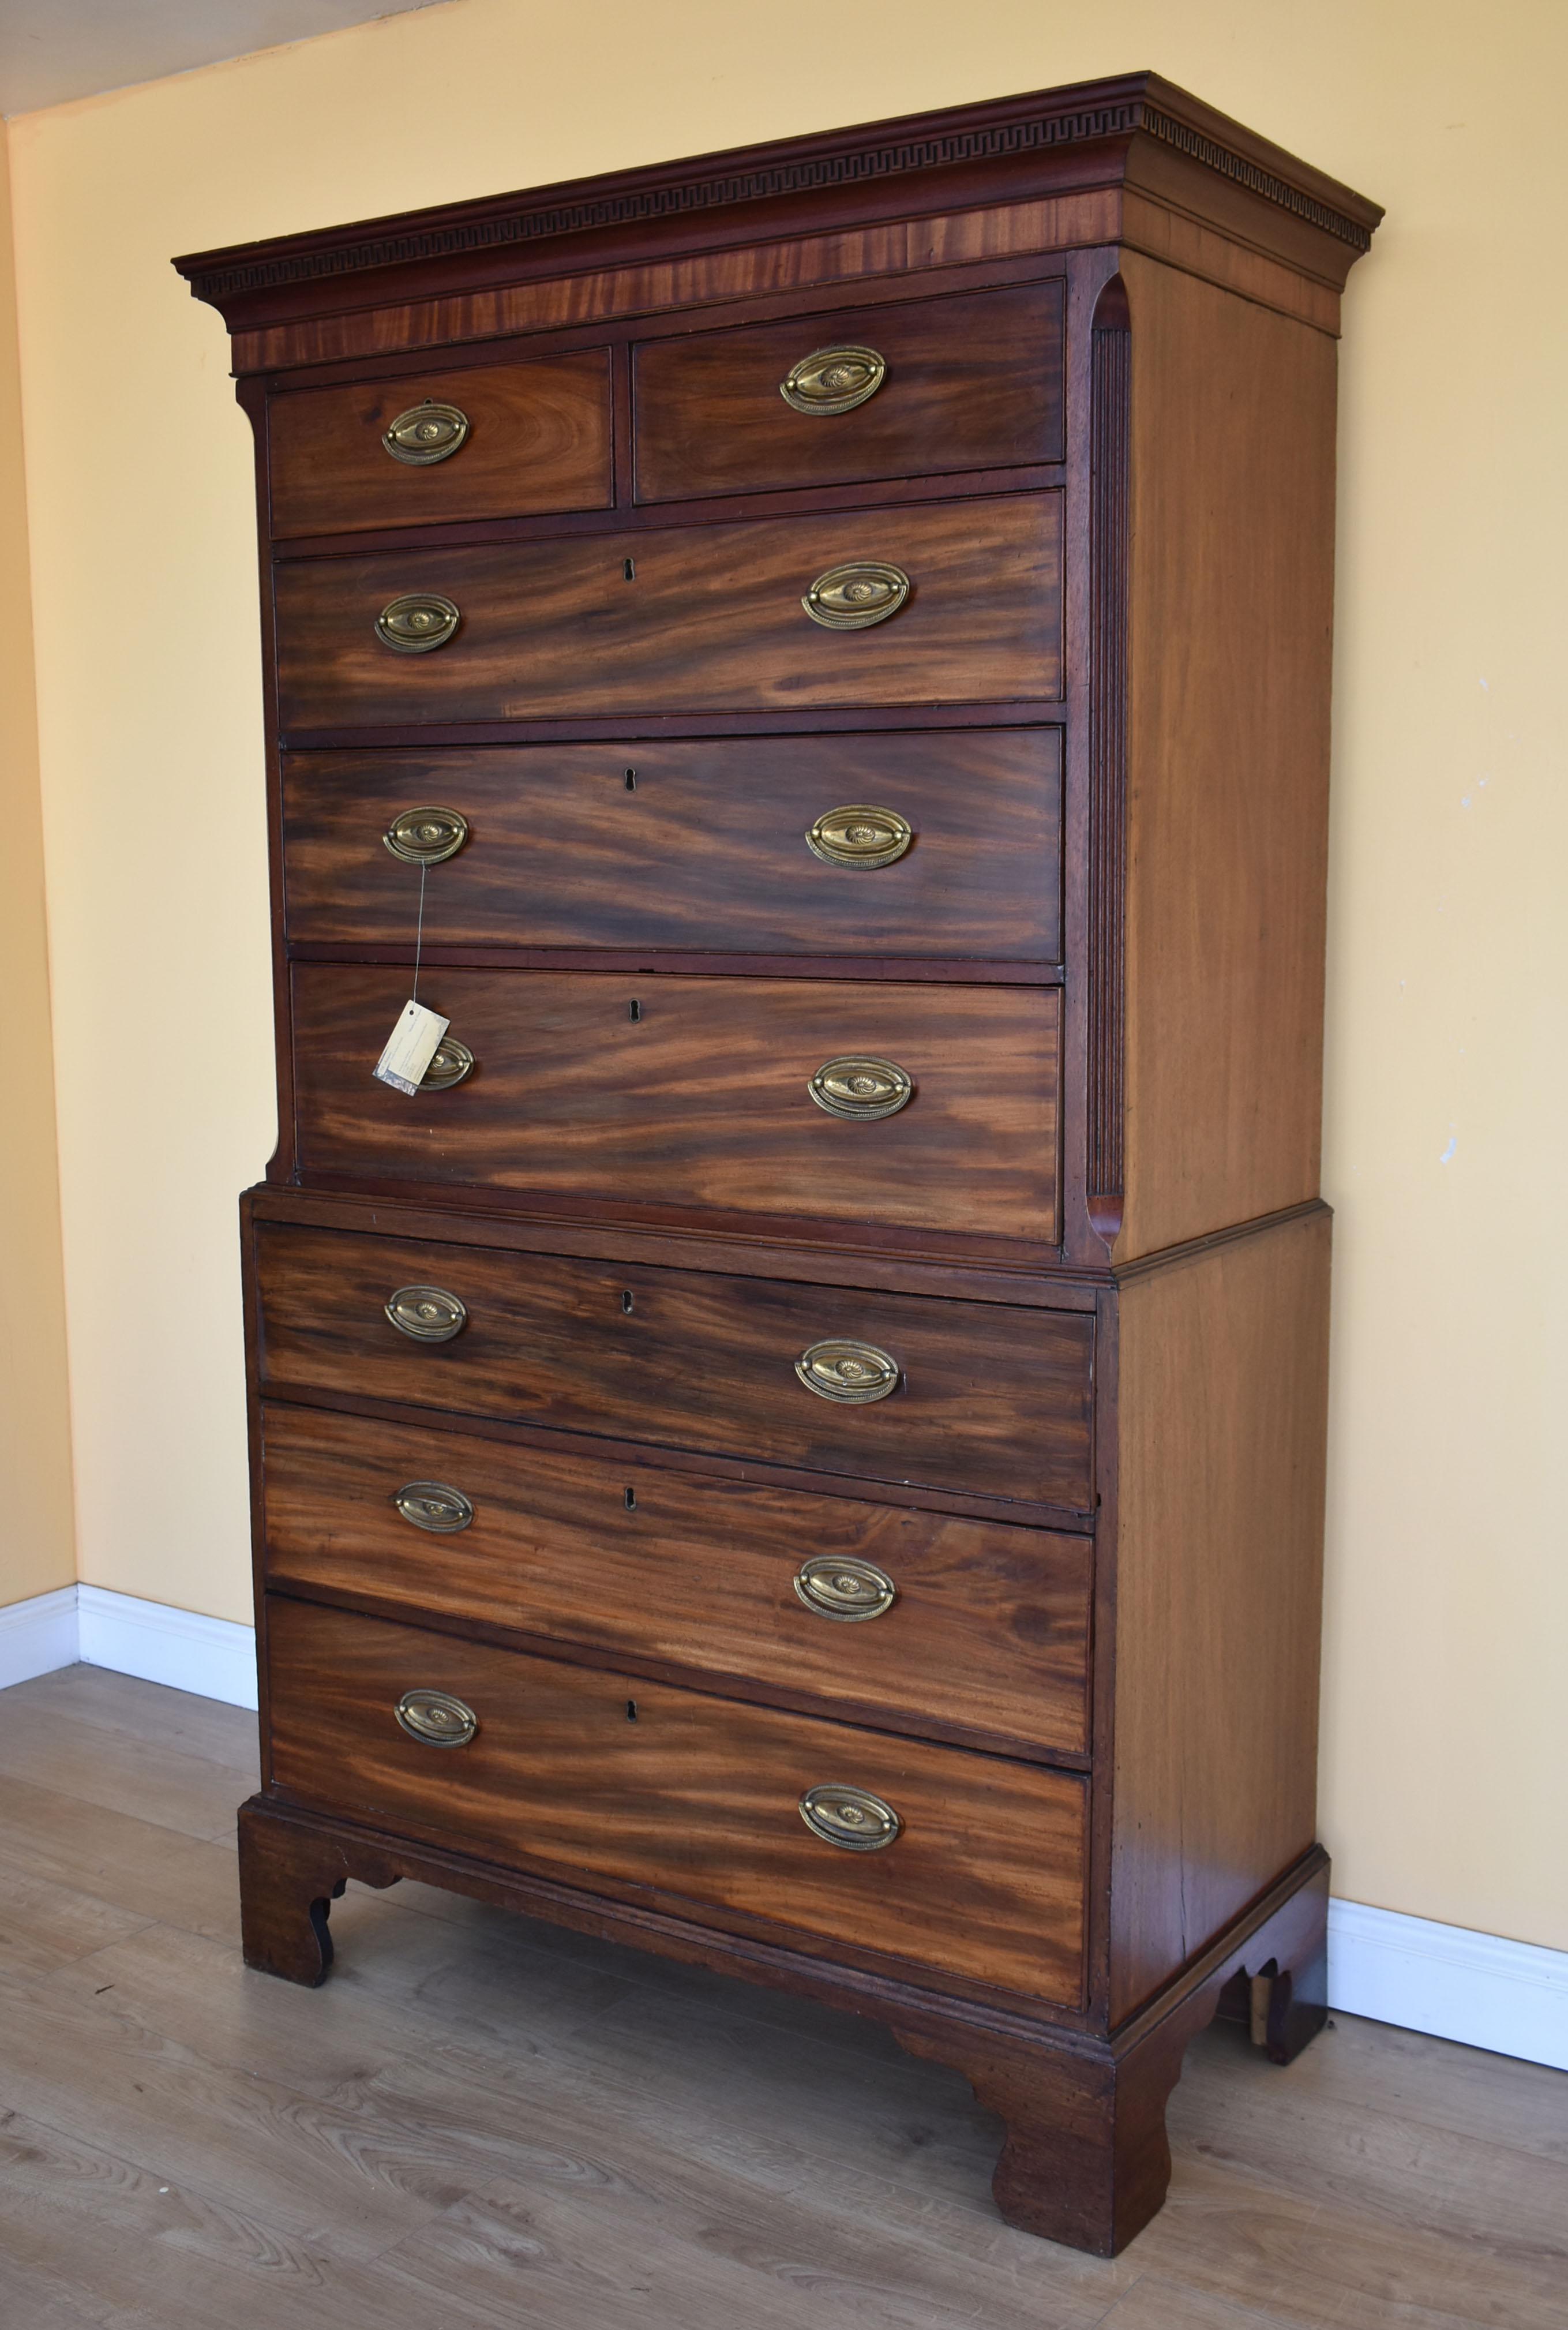 For sale is a good quality, George III Mahogany chest on chest, having a dentil moulded cornice, above four graduated drawers, each with brass plate handles, flanked by canted corners. Below this, the base has a further three drawers, each with